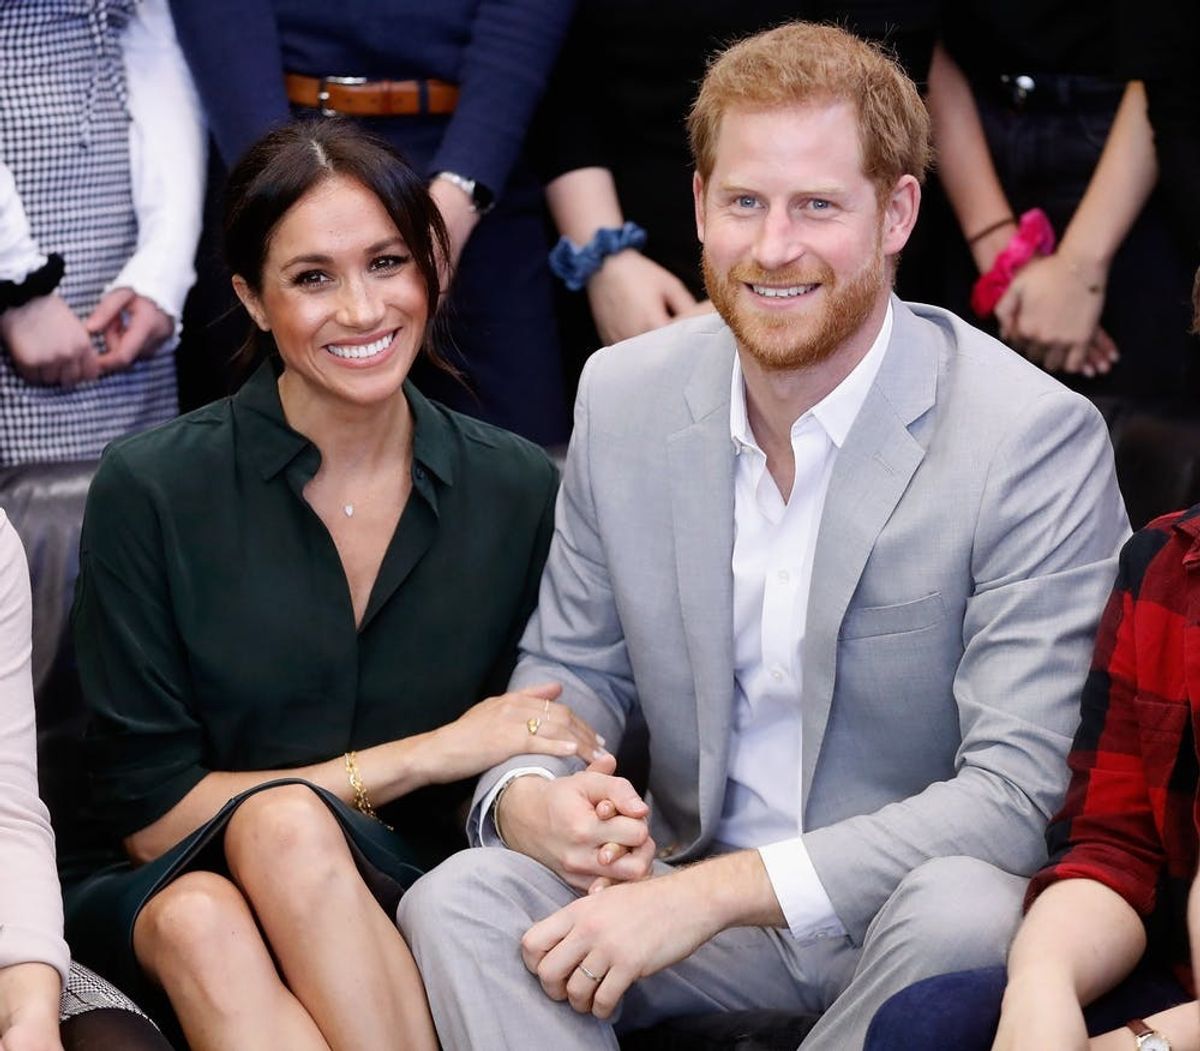 Prince Harry and Meghan Markle’s Royal Tour Itinerary Is Jam-Packed With Activities